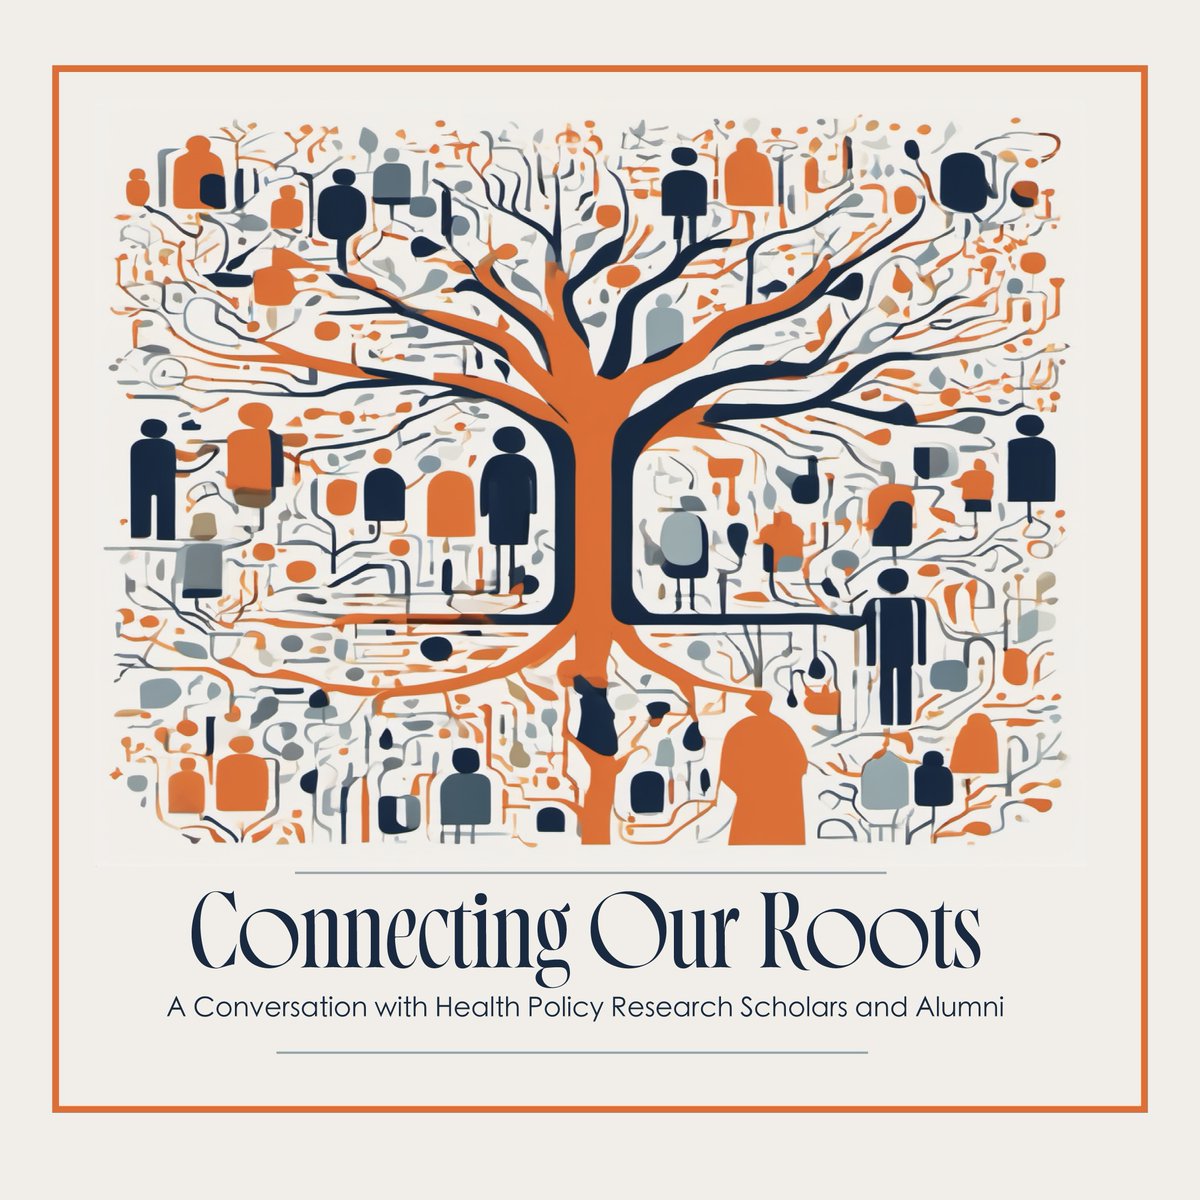 Check out Ep2 of Connecting Our Roots! Cohort 4 scholar Gabriel Johnson discusses the importance of integrity in his research & career. All views are the scholars' own. Spotify (spoti.fi/4aFPNk8), Apple (apple.co/4an38OC) + Podcastle (bit.ly/3VEczEJ)